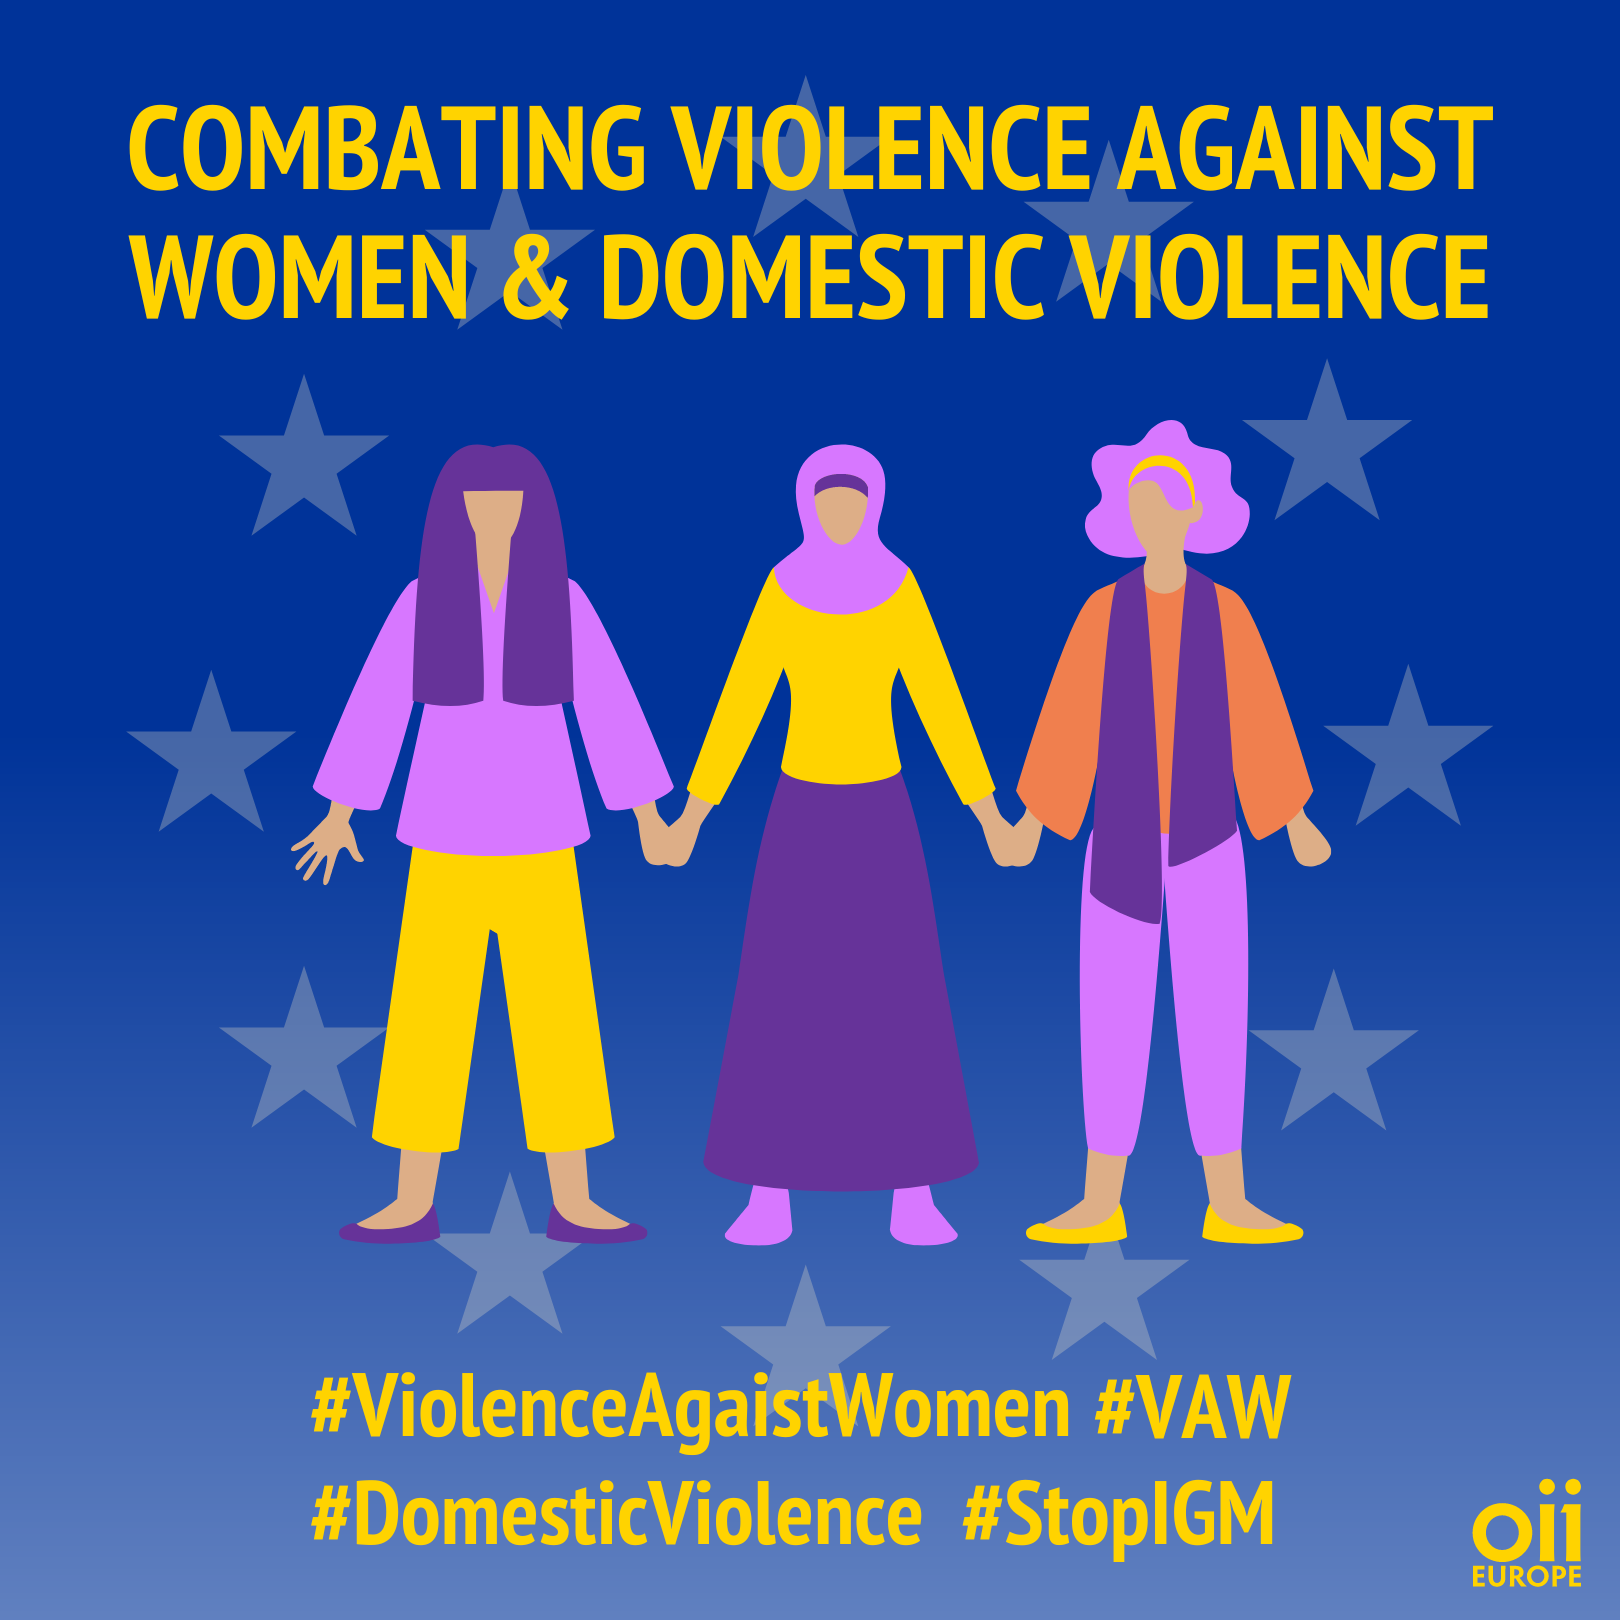 The European Parliament position on the Directive on combating violence against women and domestic violence includes IGM among the forms of violence within the Directive scope